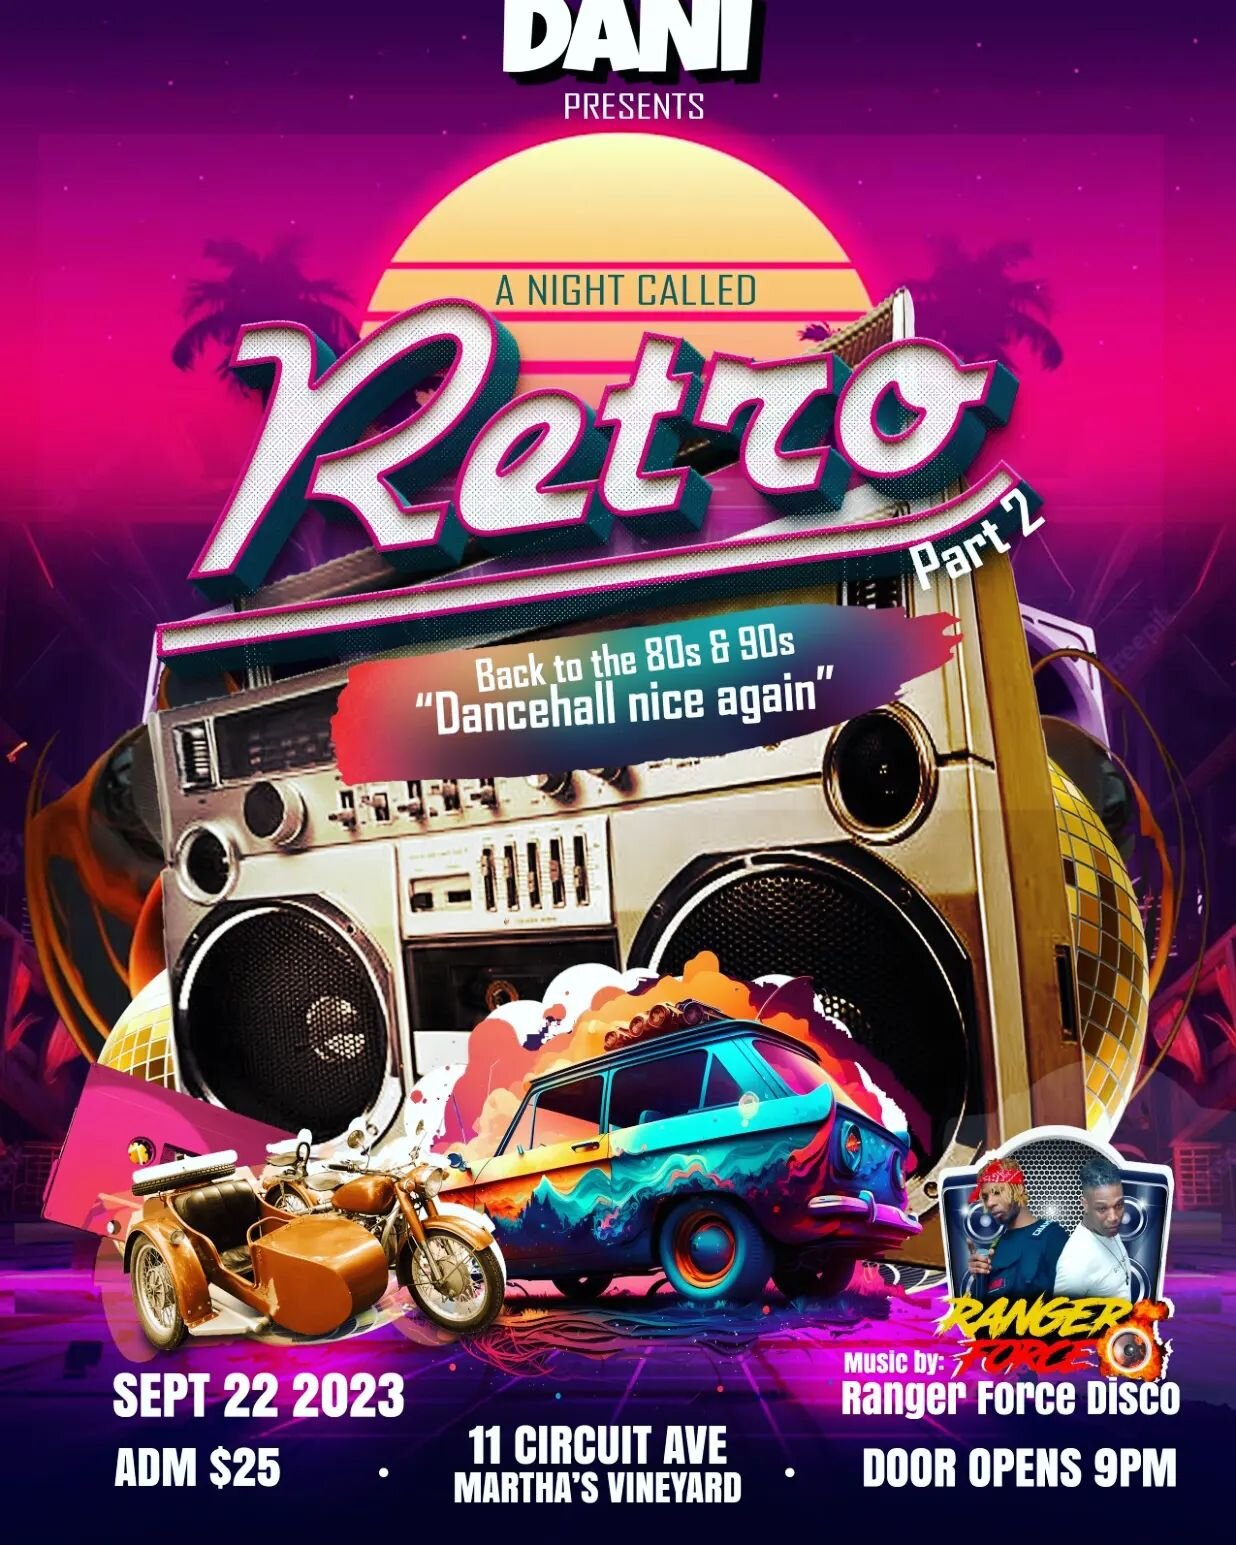 Come on out for retro night tonight @11_circuitrestaurantbar gonna be lit 🔥 
#party #oakbluffsmarthasvineyard #11circuit #music #partytime #funtimes #retro #dj #reggae #reggaemusic #colors #placetobe #placetovisit